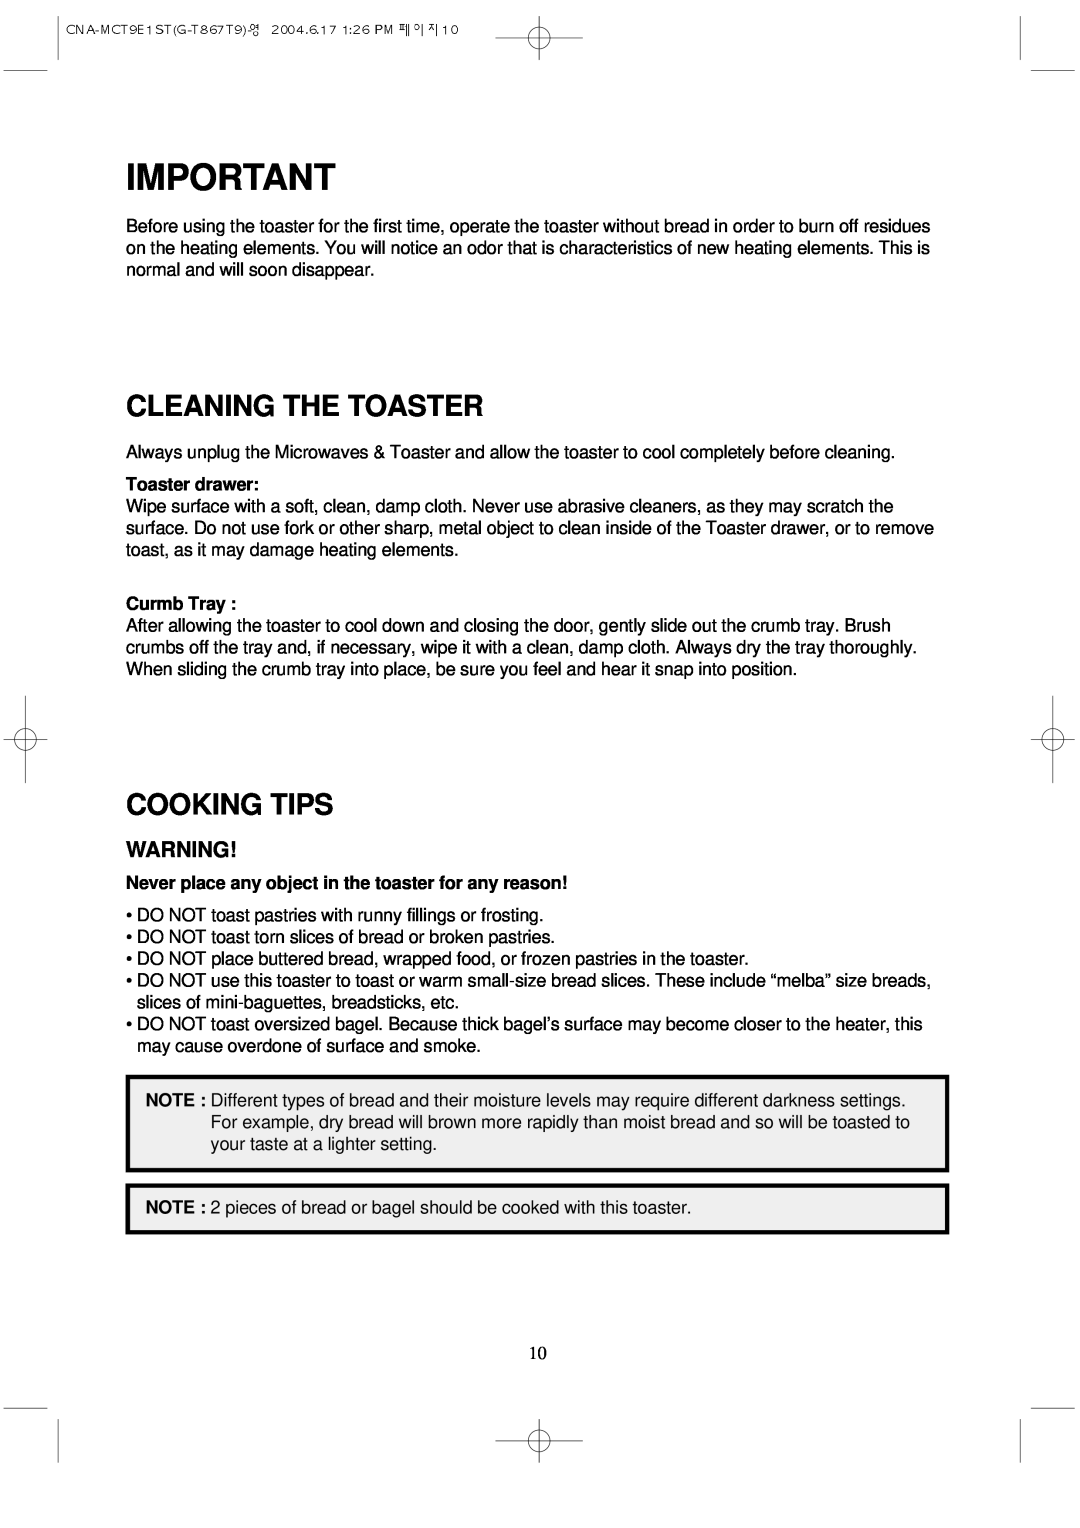 Magic Chef MCT9E1ST manual Cleaning The Toaster, Cooking Tips, Toaster drawer, Curmb Tray 